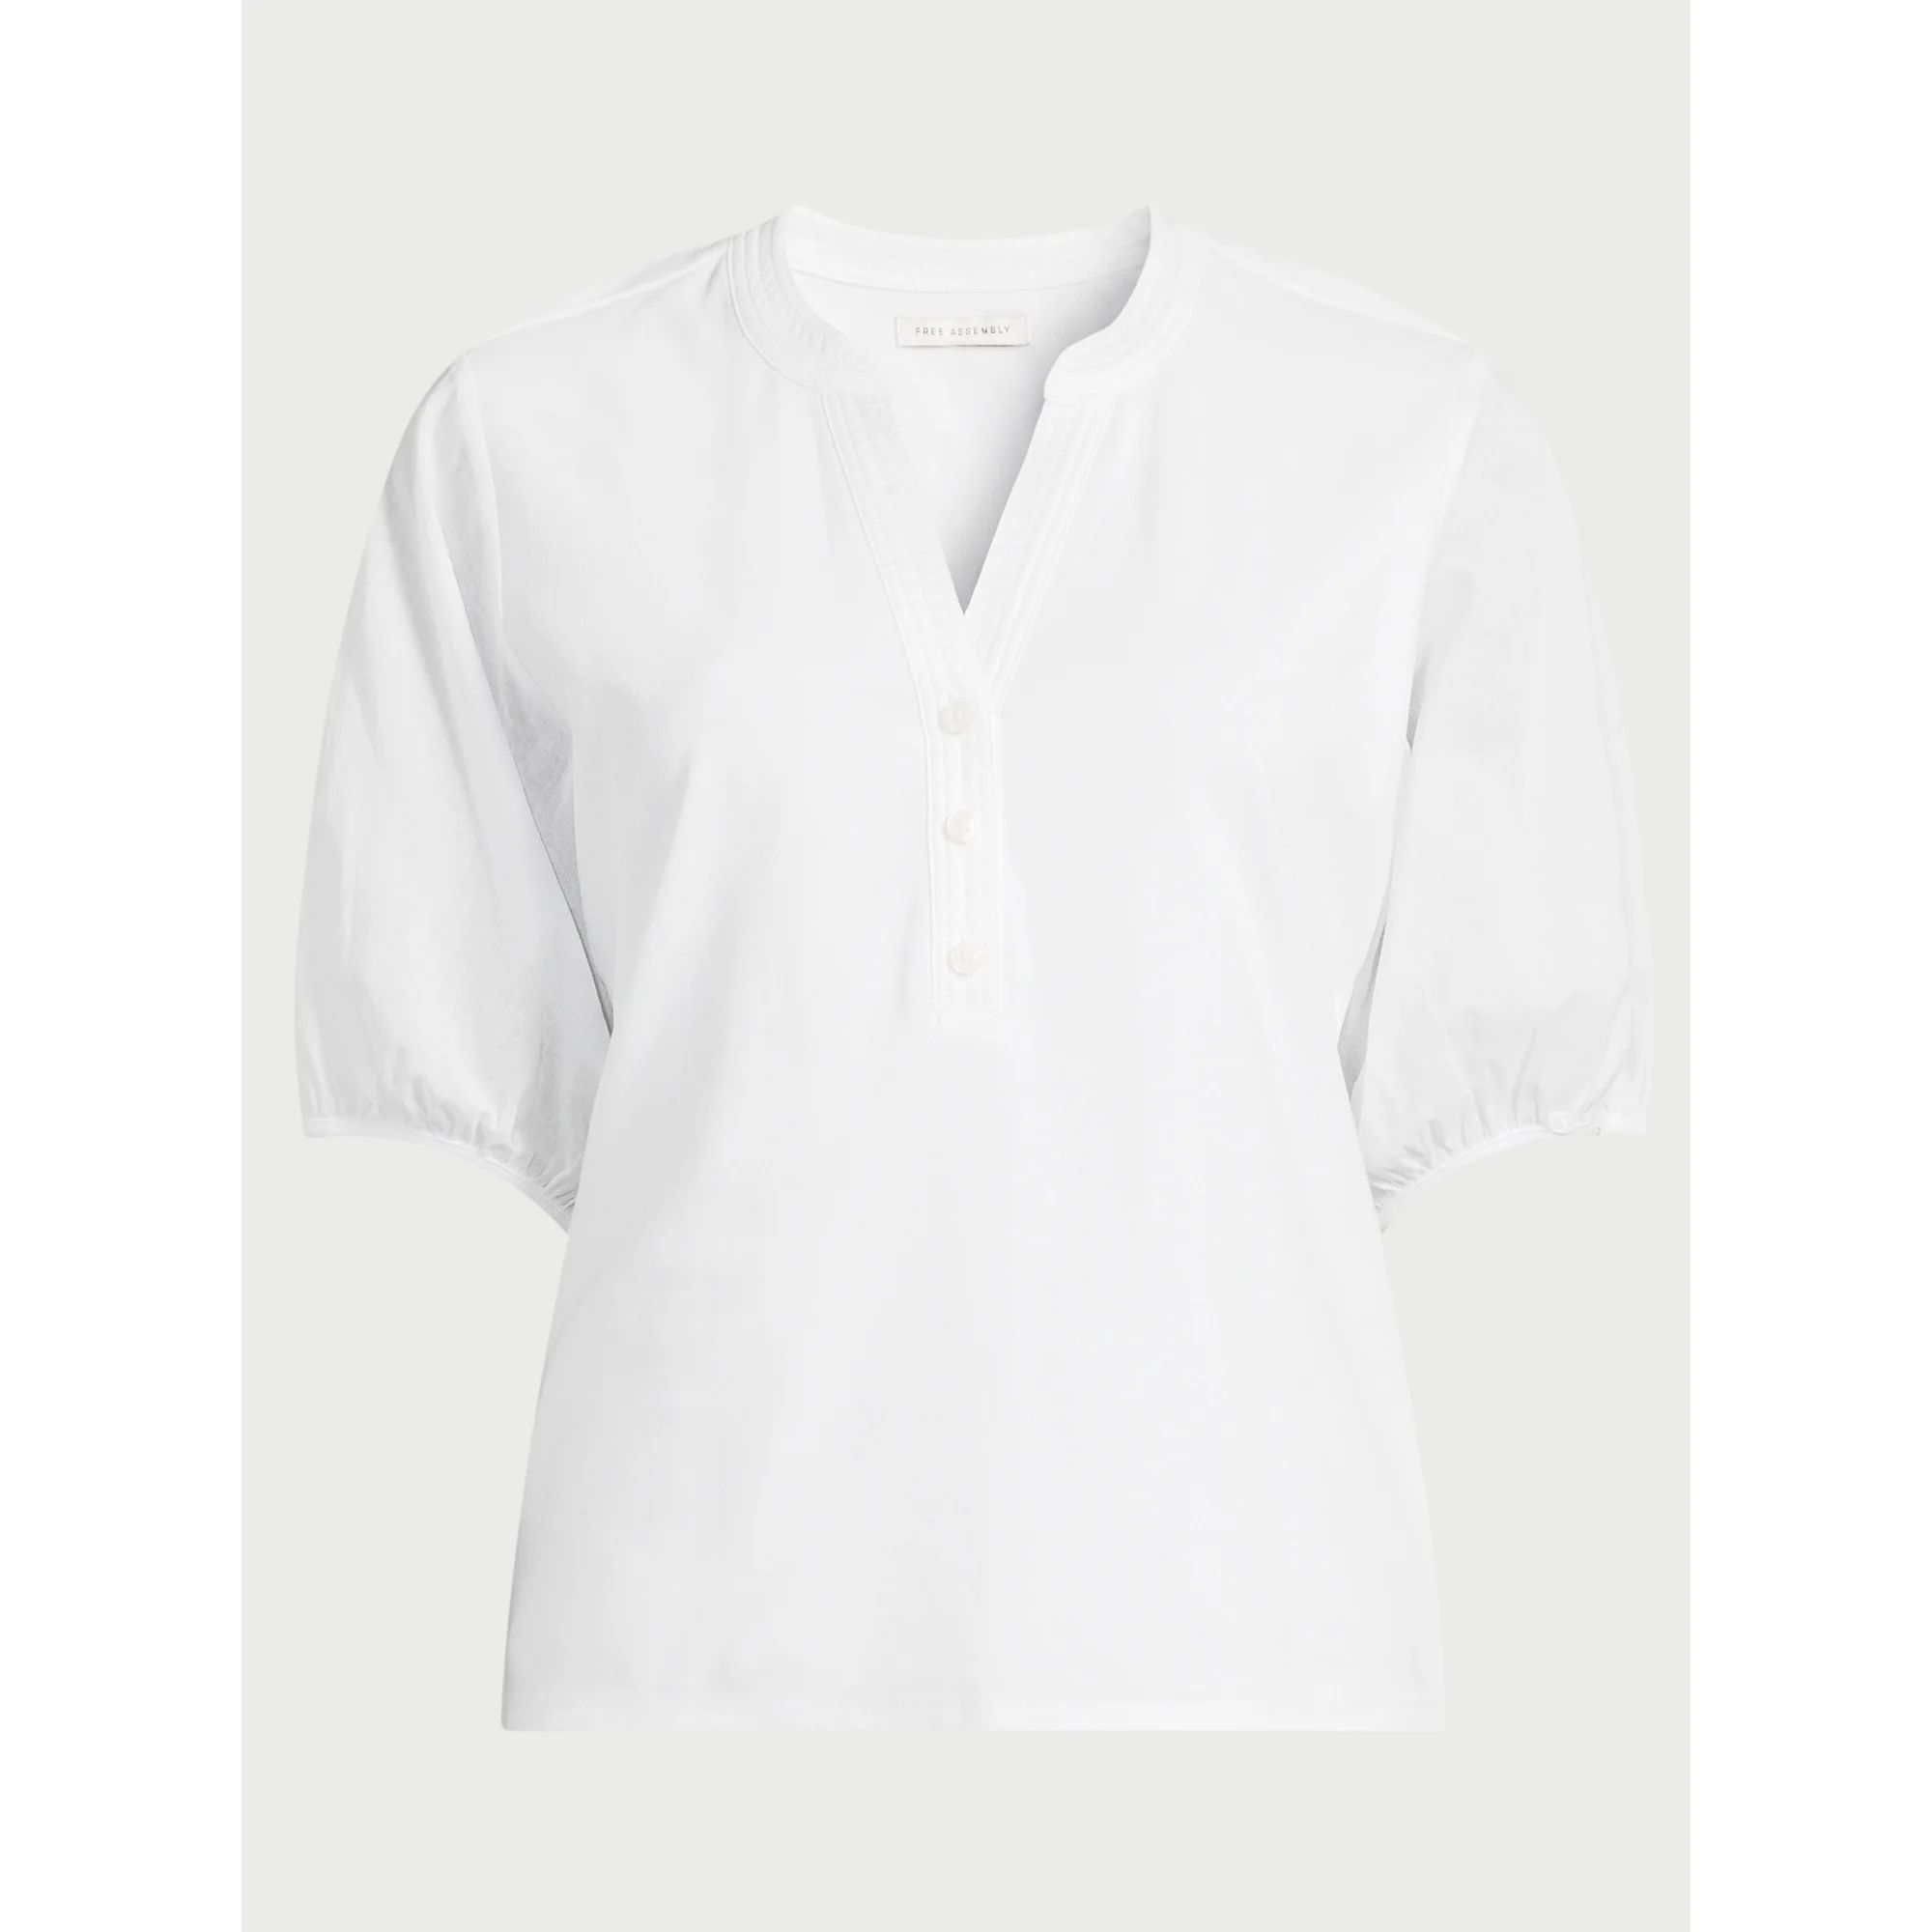 Free Assembly Women’s Henley Tee with Short Puff Sleeves, Sizes XS-XXL | Walmart (US)